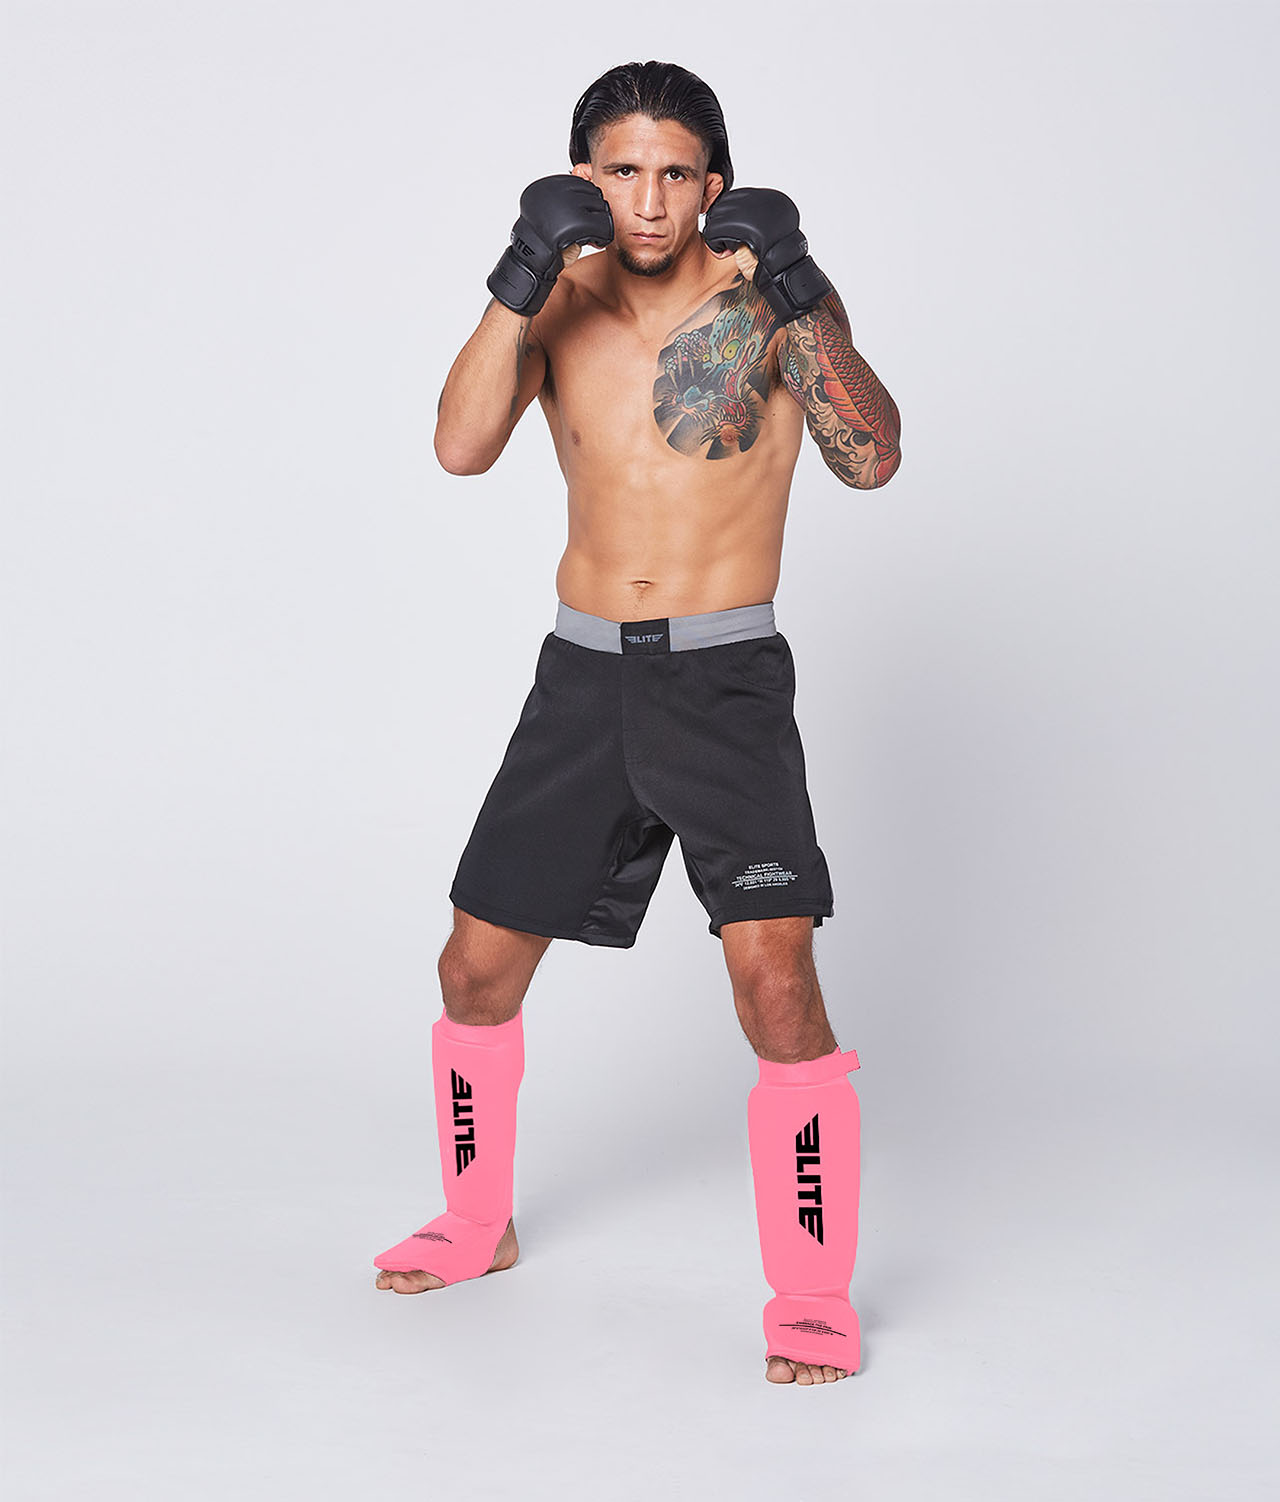 Elite Sports Adults' Standard Pink MMA Shin Guards Action